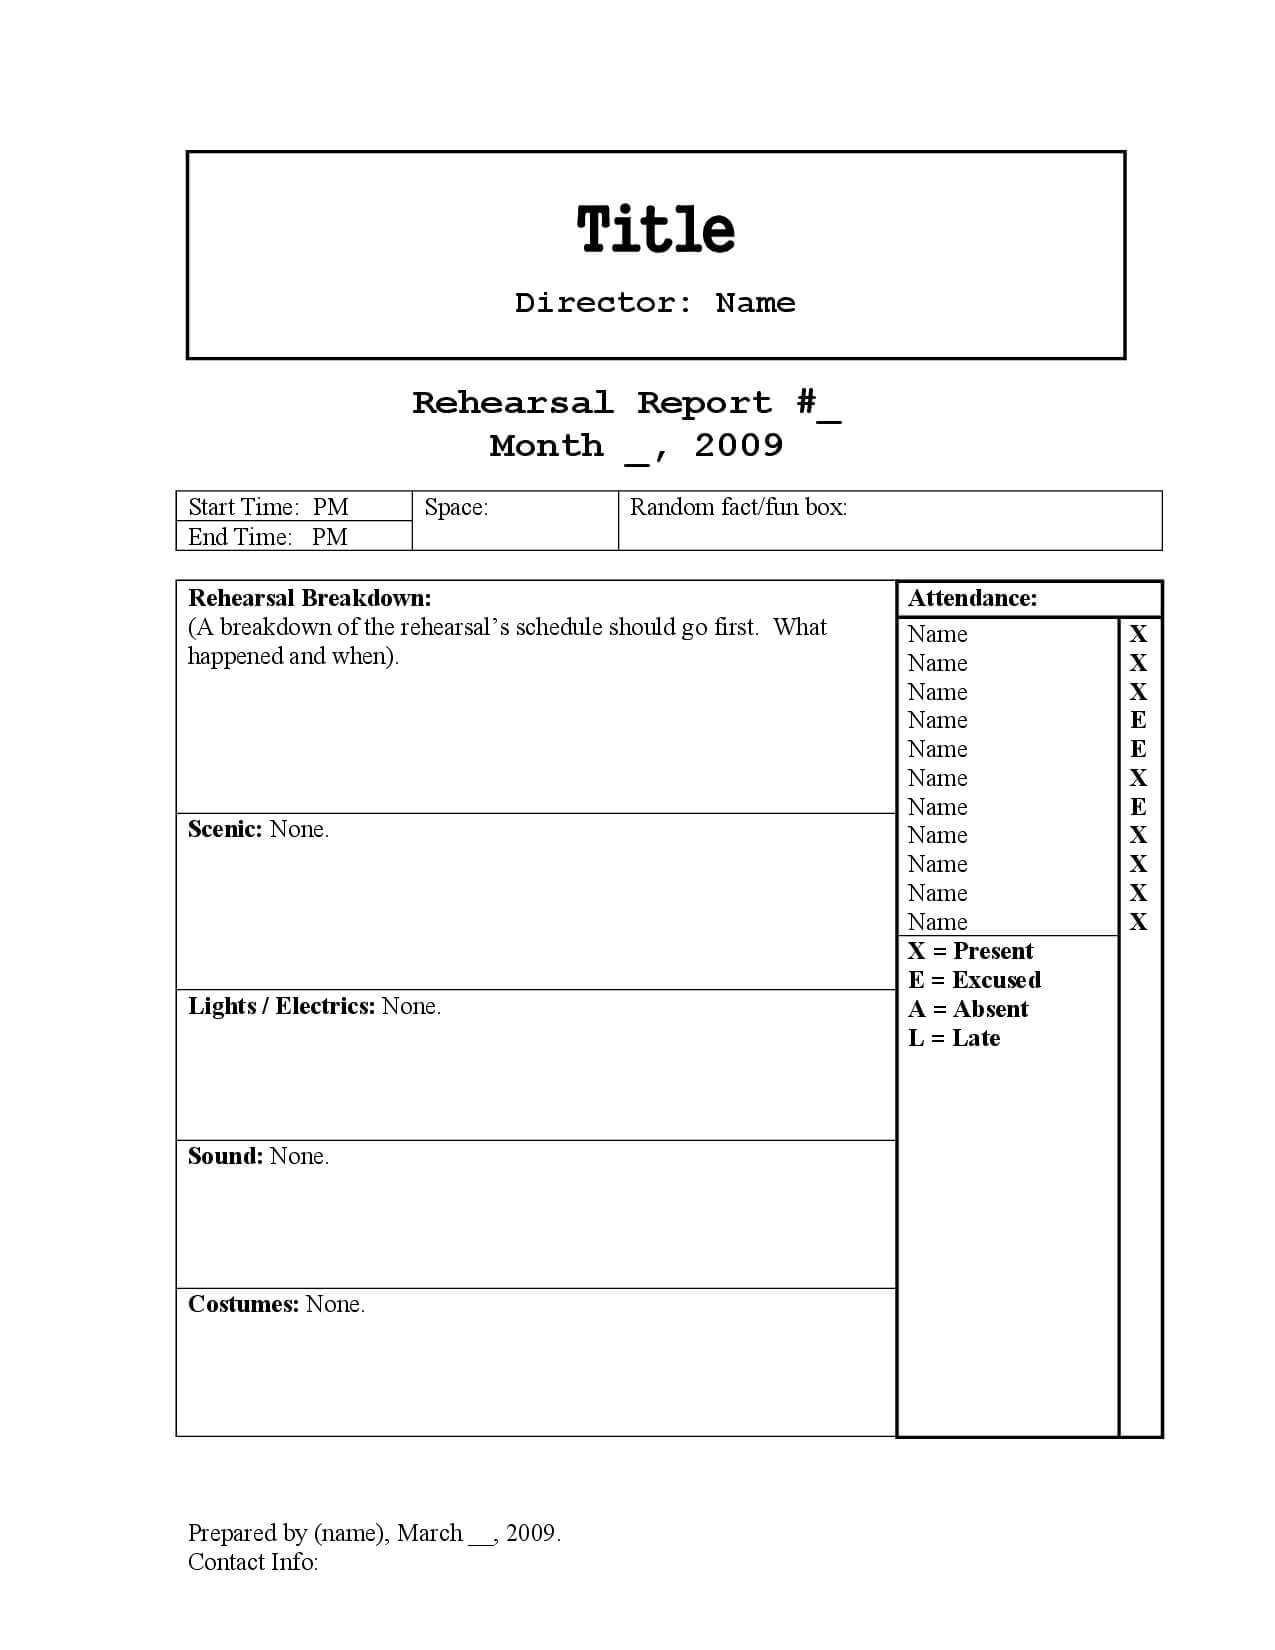 Rehearsal Report Template | Stage Manager, Rehearsal Regarding Rehearsal Report Template